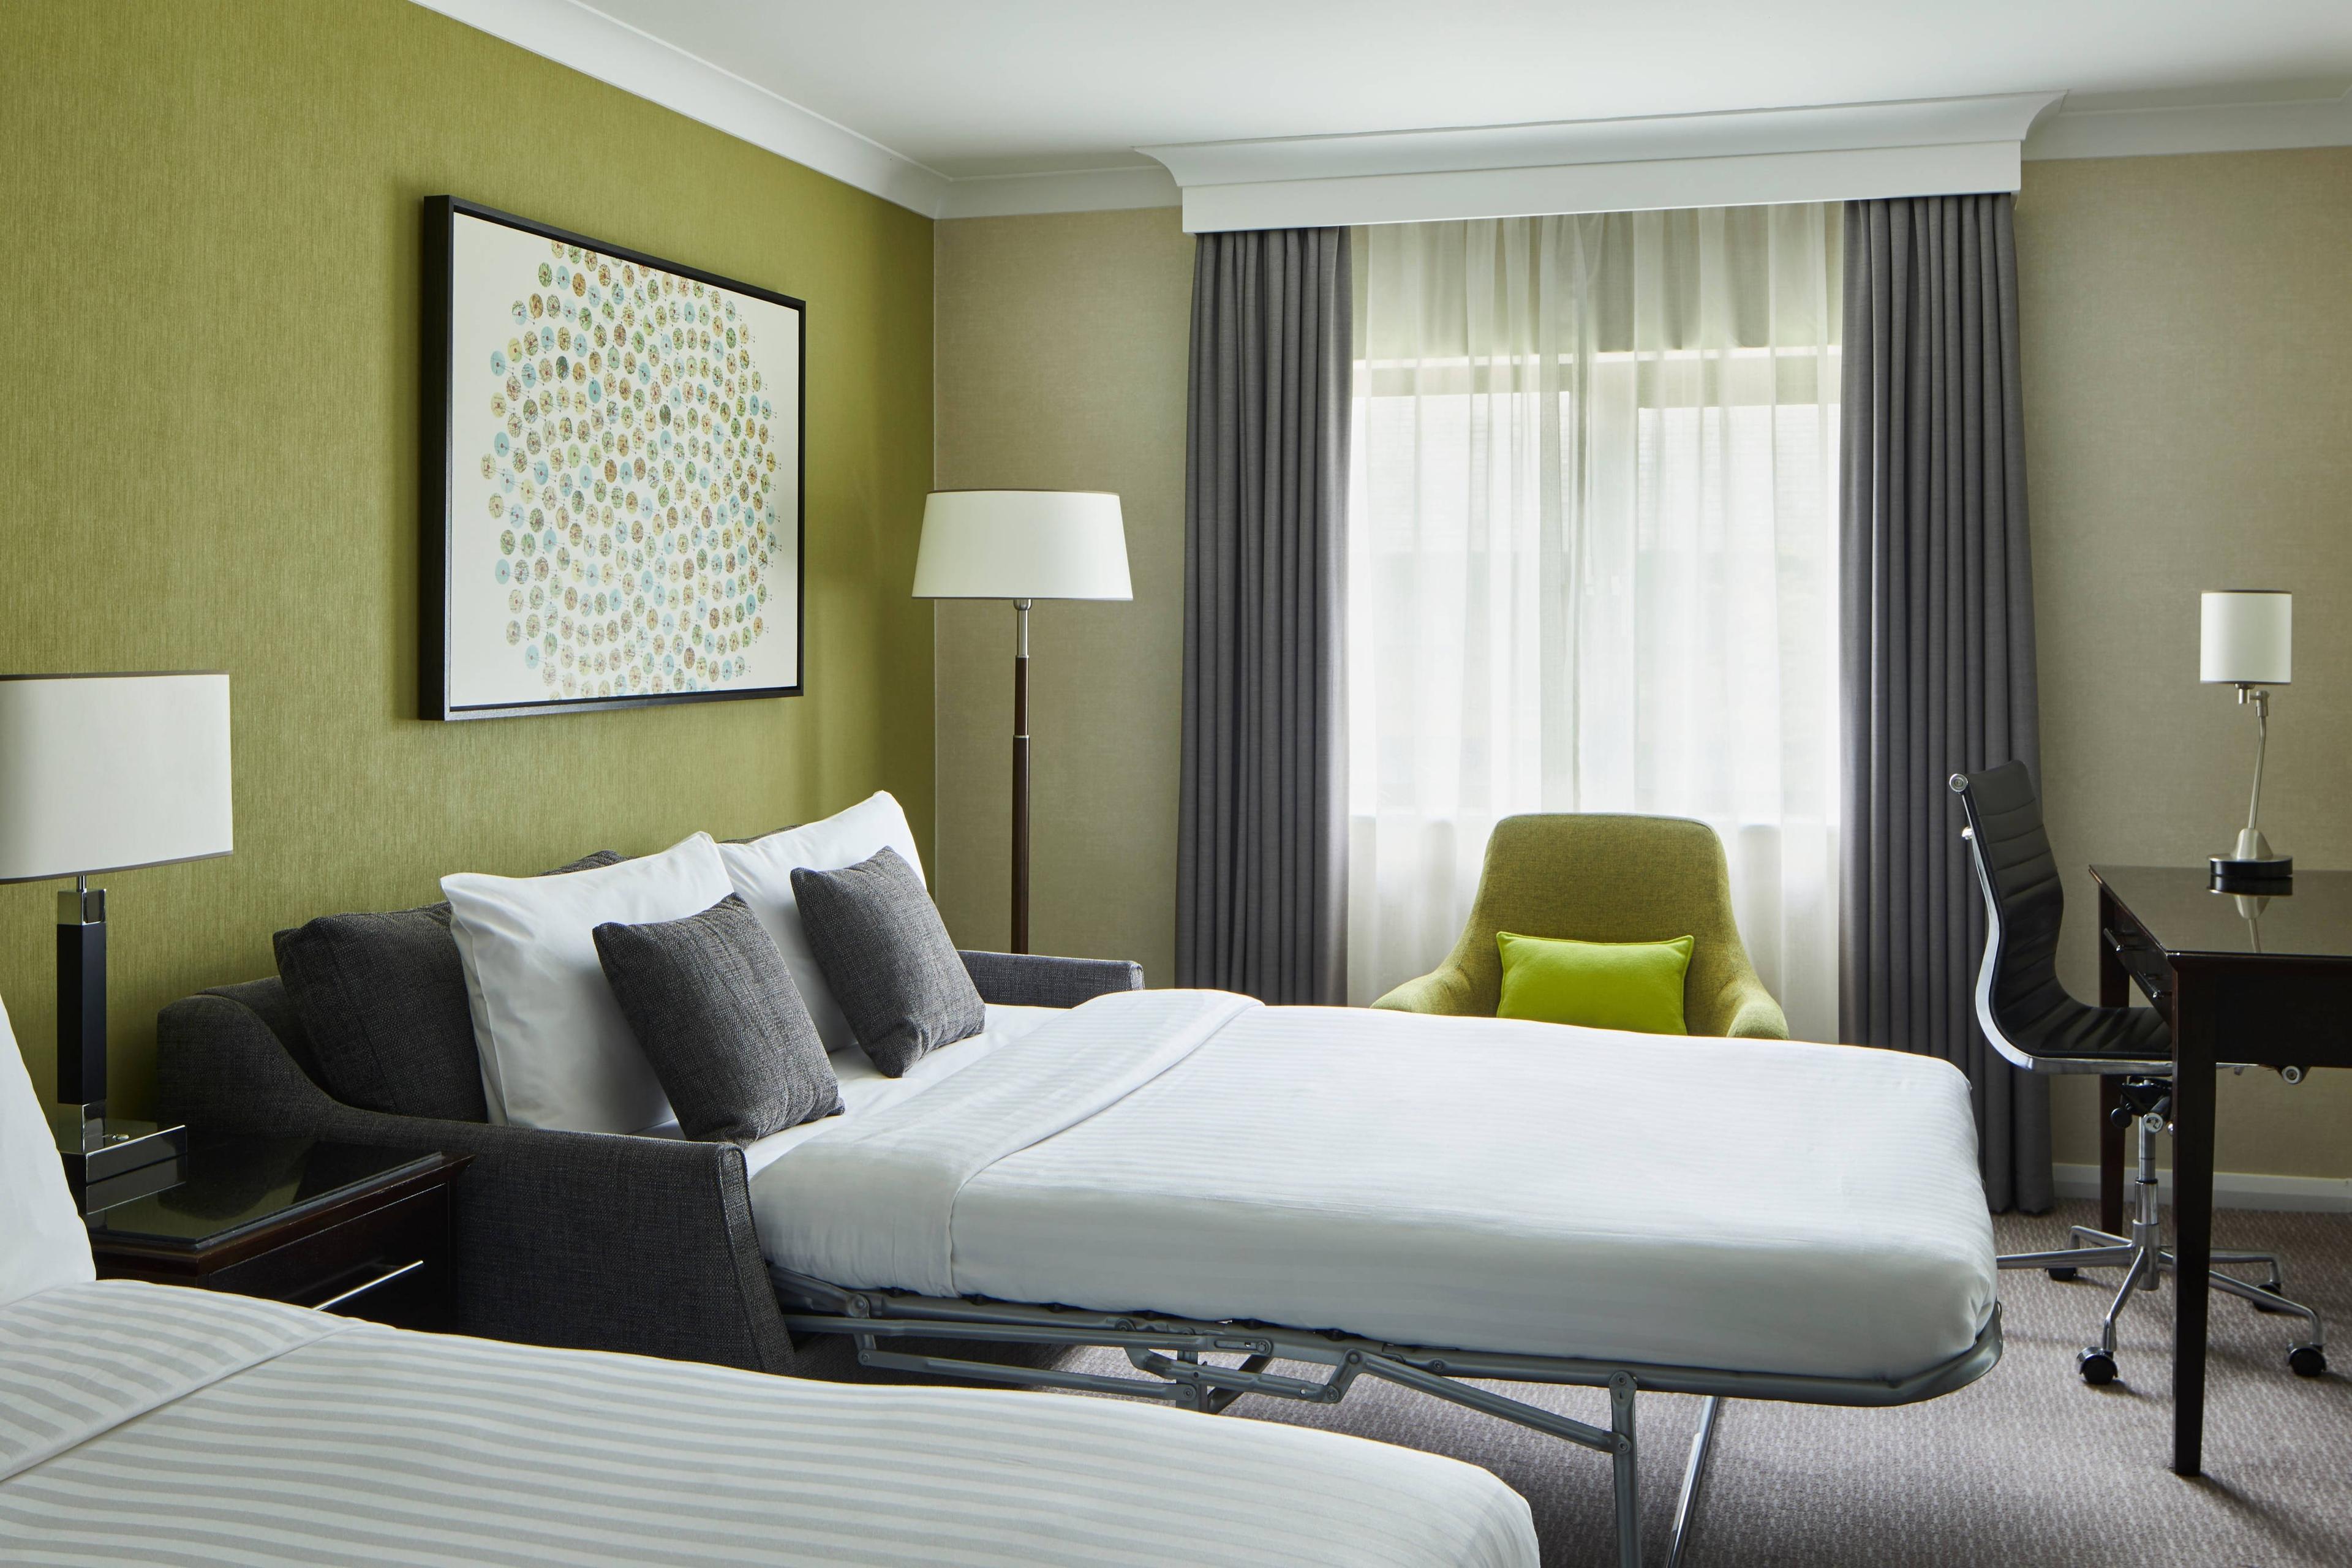 Our family guest rooms are great for families on vacation, providing ample space with a sofa bed that folds away.